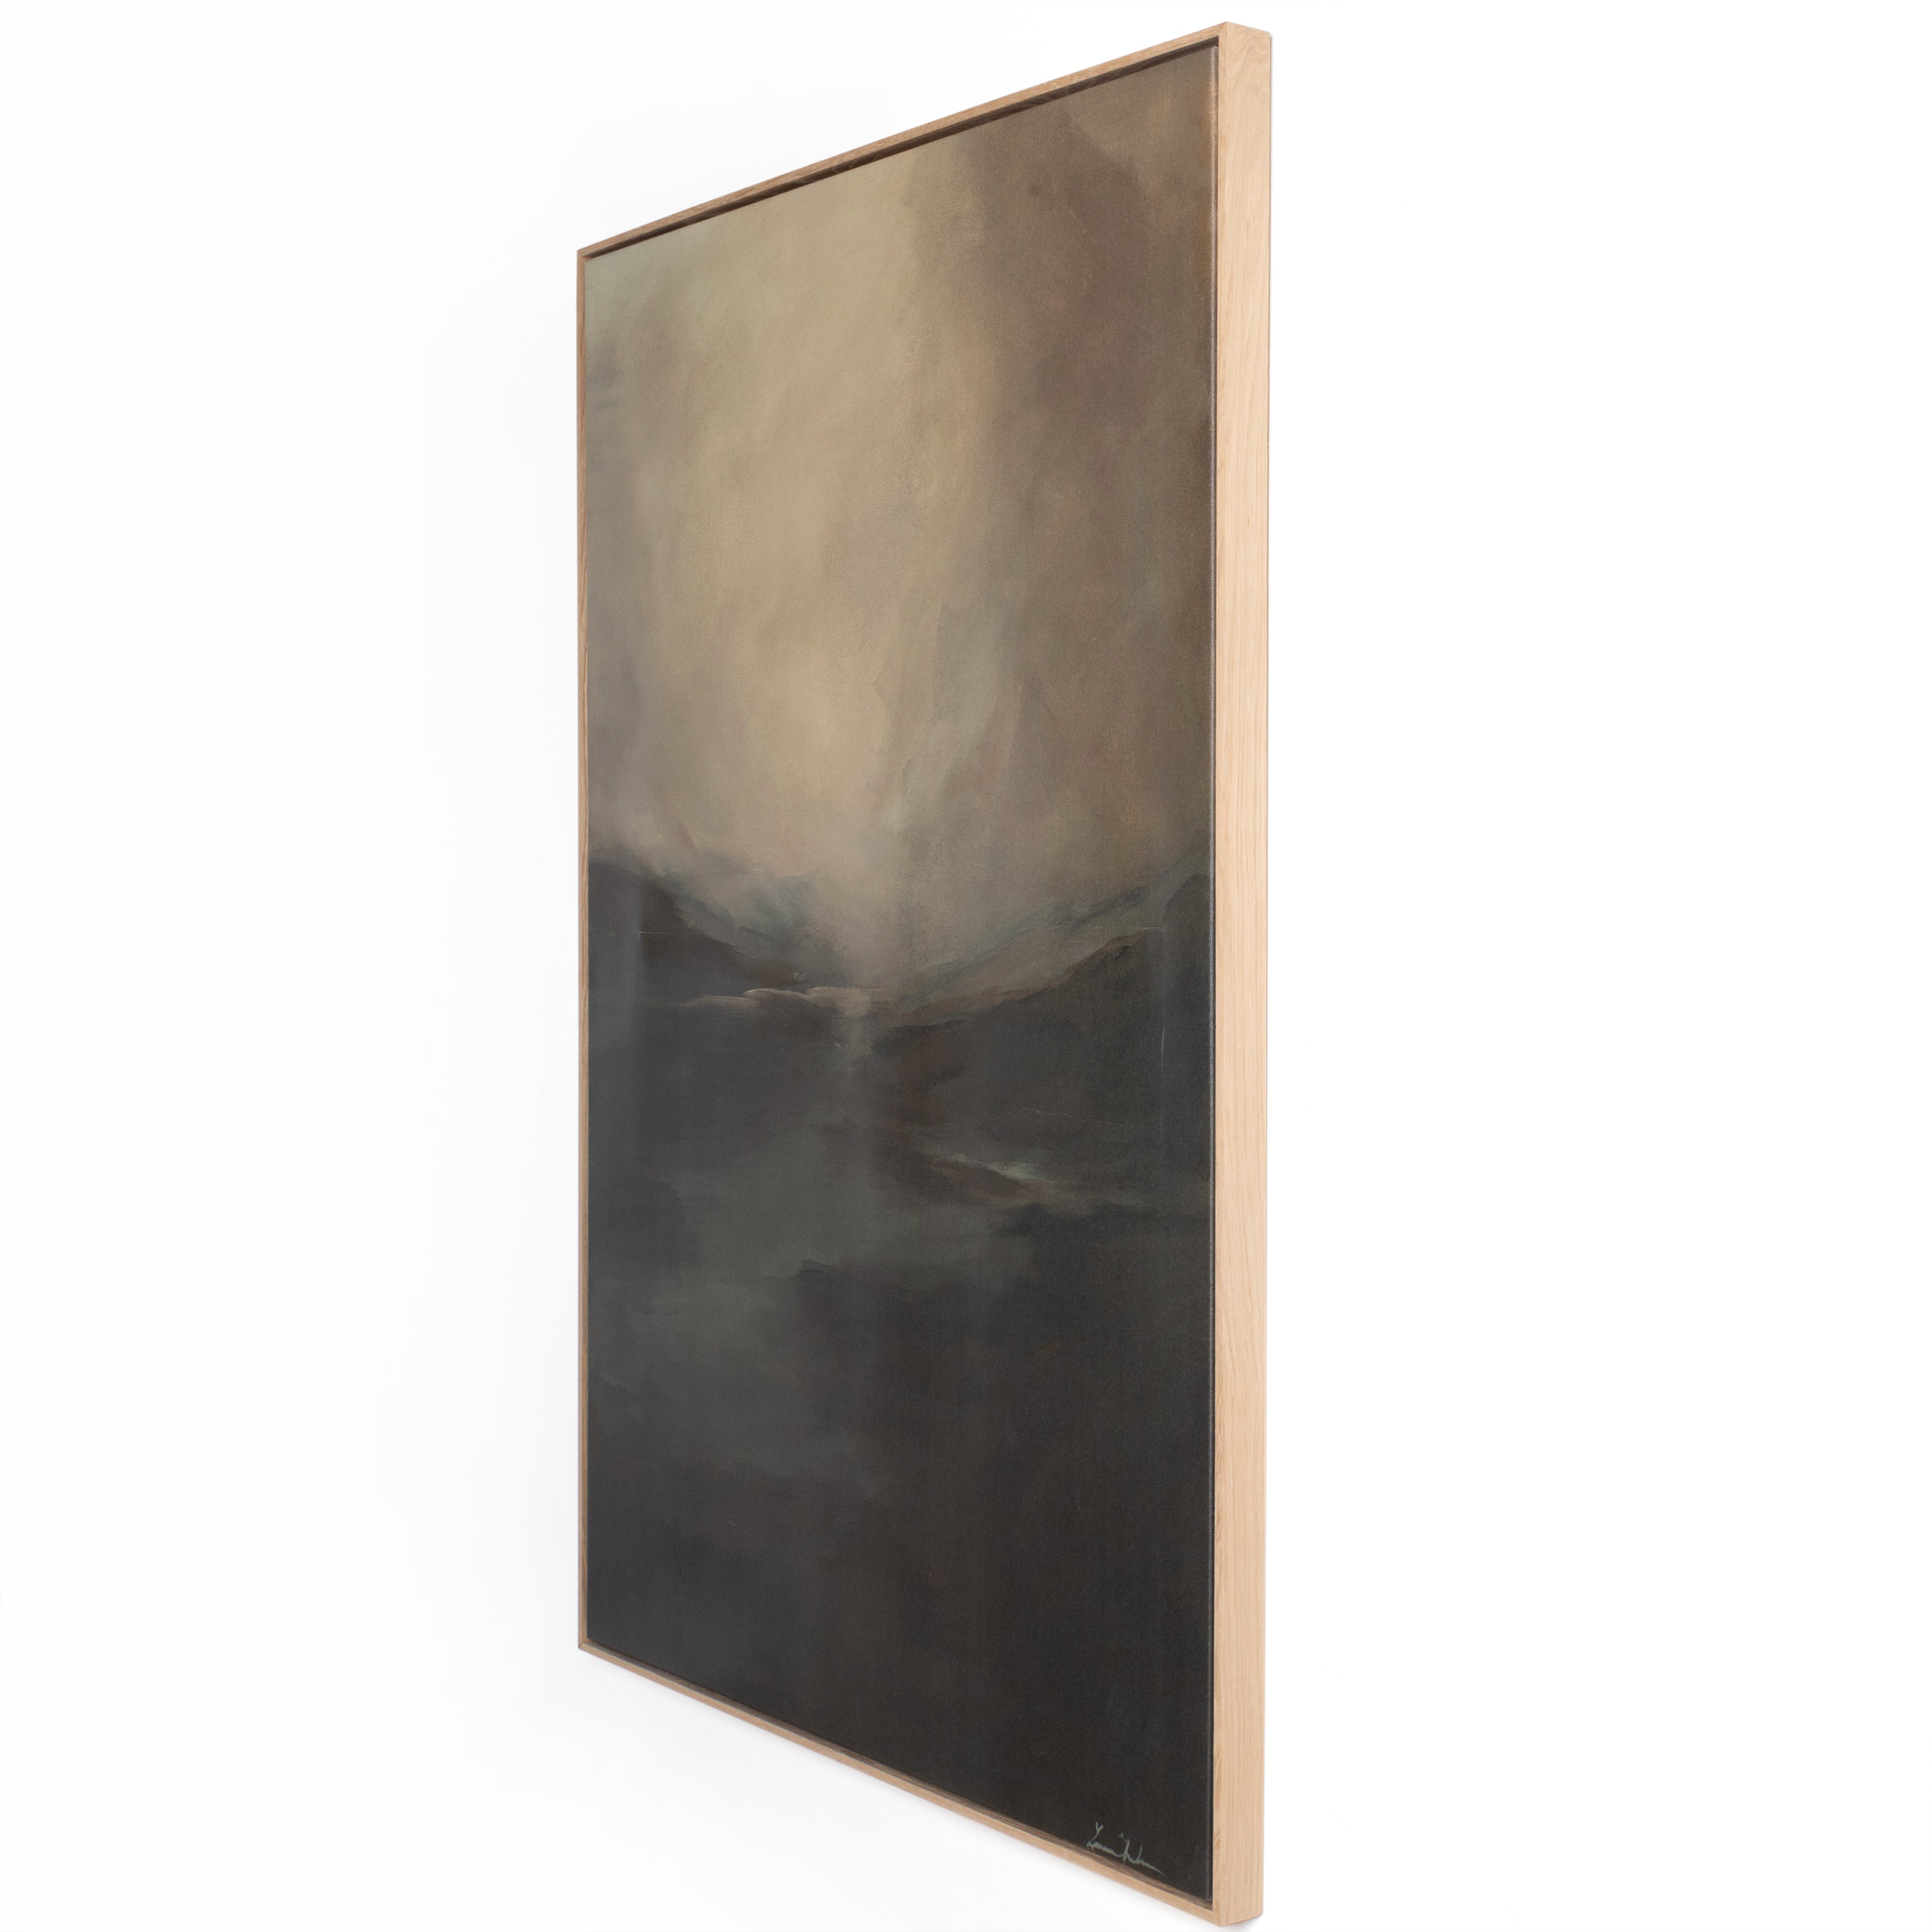 Inspired by nature and the beauty of ordinary life, Dallas-based artist Lauren Fuhr captures fog rolling over the hills on matte canvas. Complemented by a vertical grain white oak floater frame. Amethyst Home provides interior design, new home construction design consulting, vintage area rugs, and lighting in the Austin metro area.